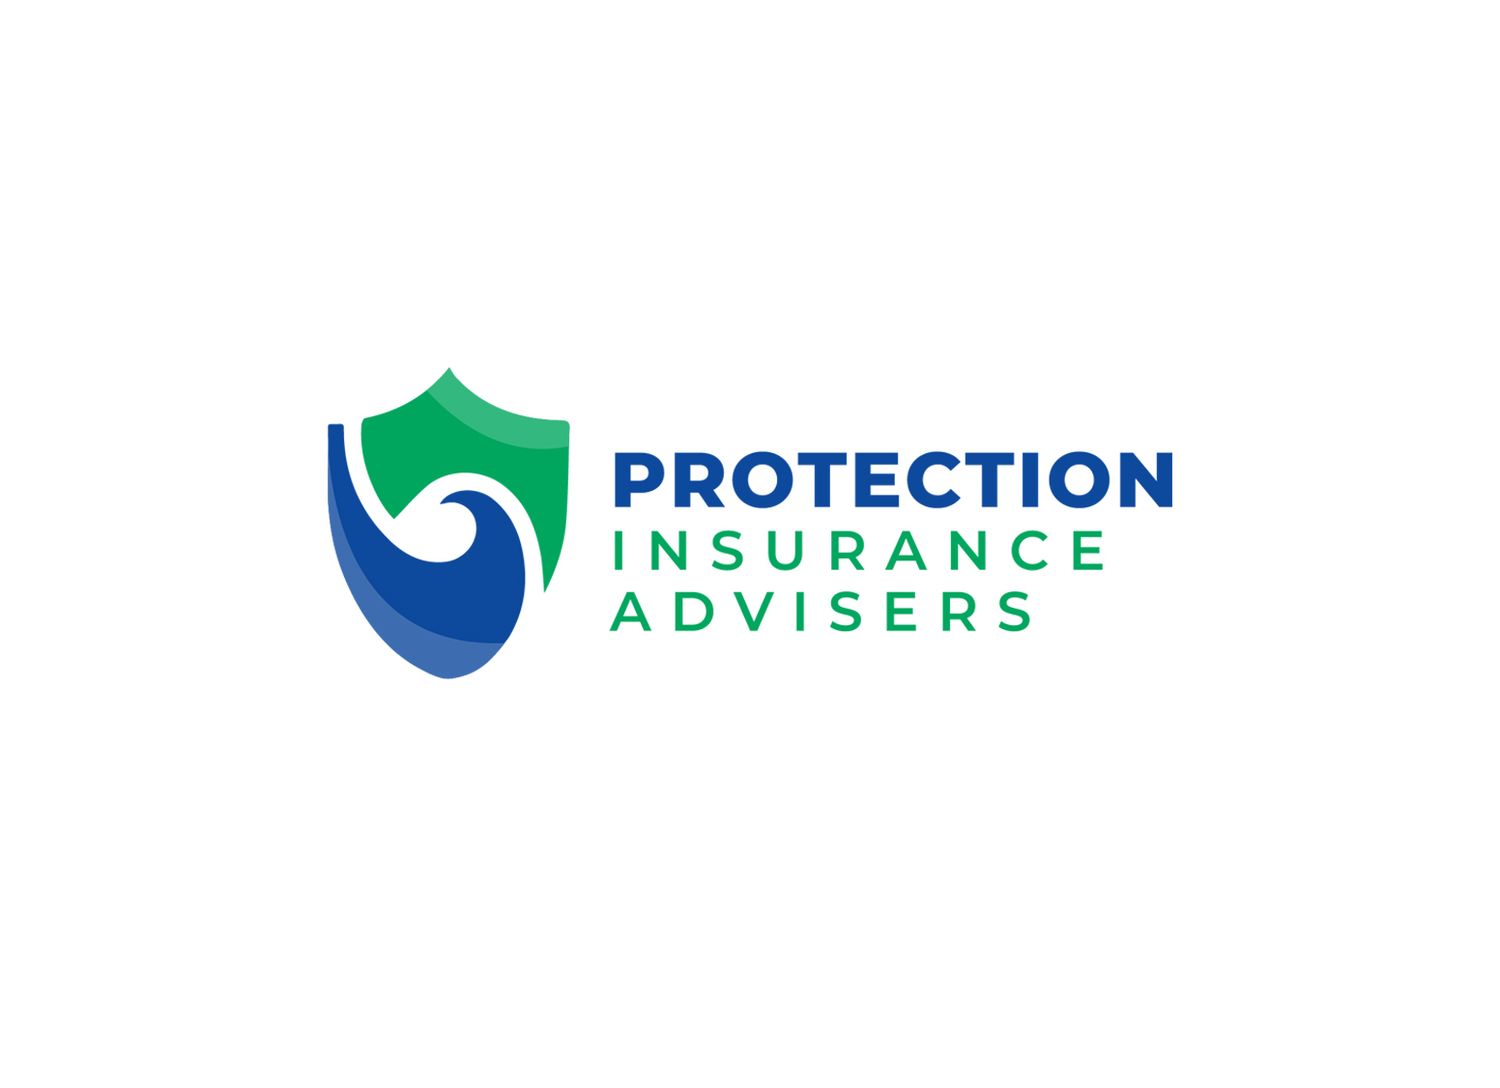 Protection Insurance Advisers